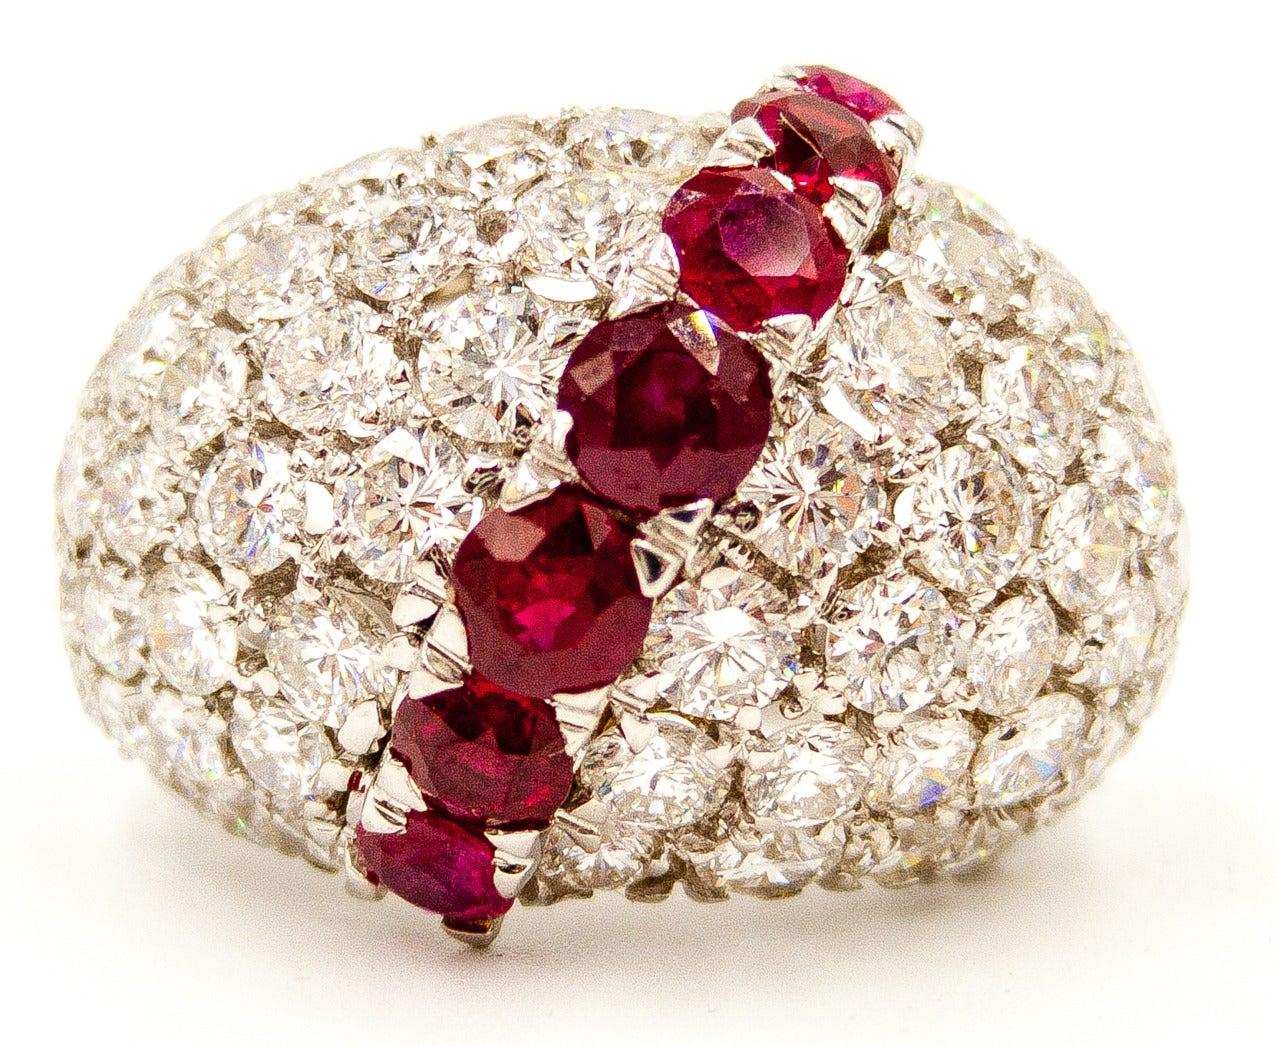 About ten carats of extremely white and clean diamonds domed around the finger, with a line of bright red, sparkling rubies bisecting on the diagonal.   Mounted in platinum, of course.  Currently size 7 1/4 but can be sized to fit up or down.